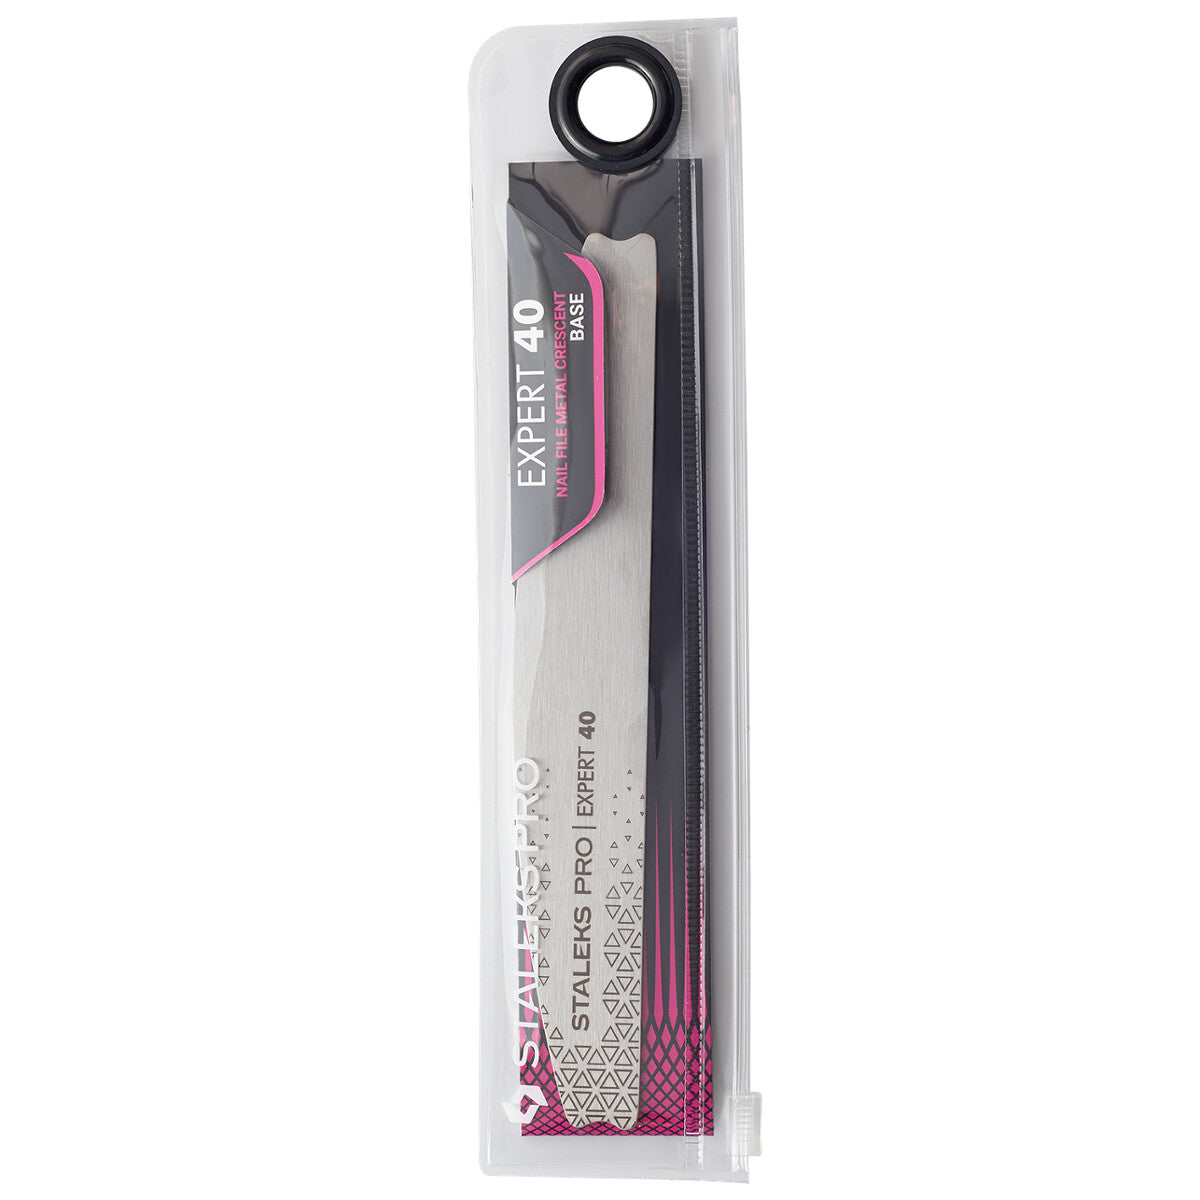    Staleks_Nail_file_metal_crescent_Base_EXPERT_40_MBE-40_4 product view 3